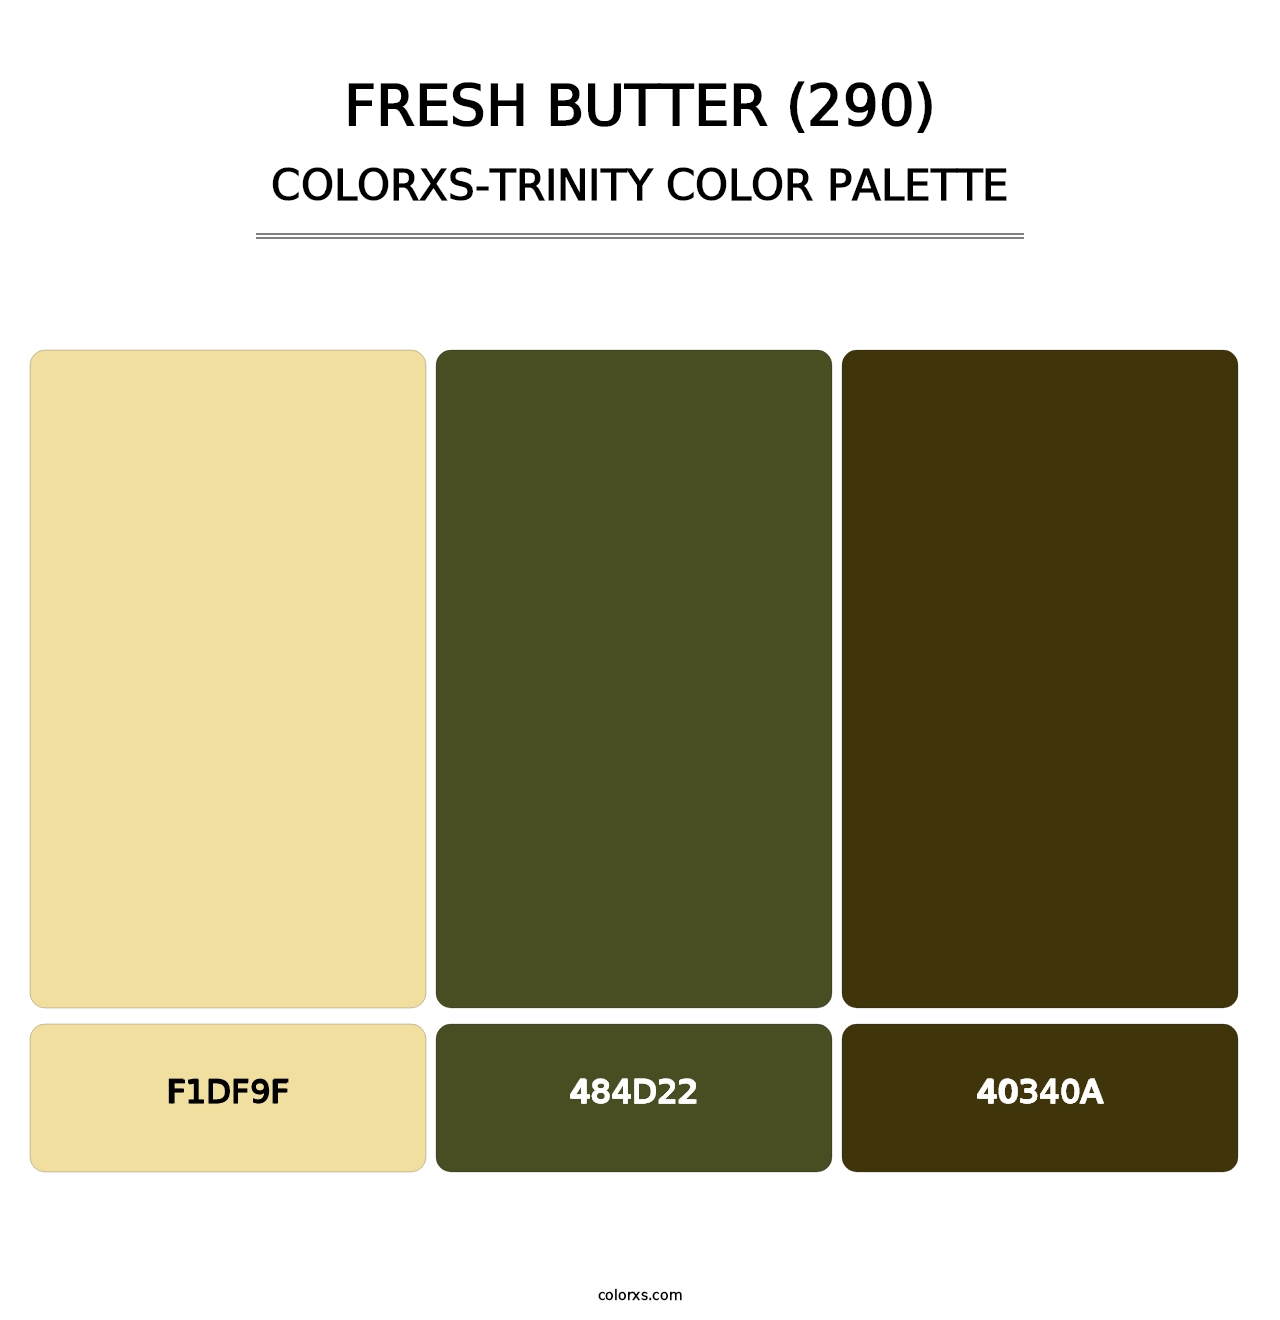 Fresh Butter (290) - Colorxs Trinity Palette